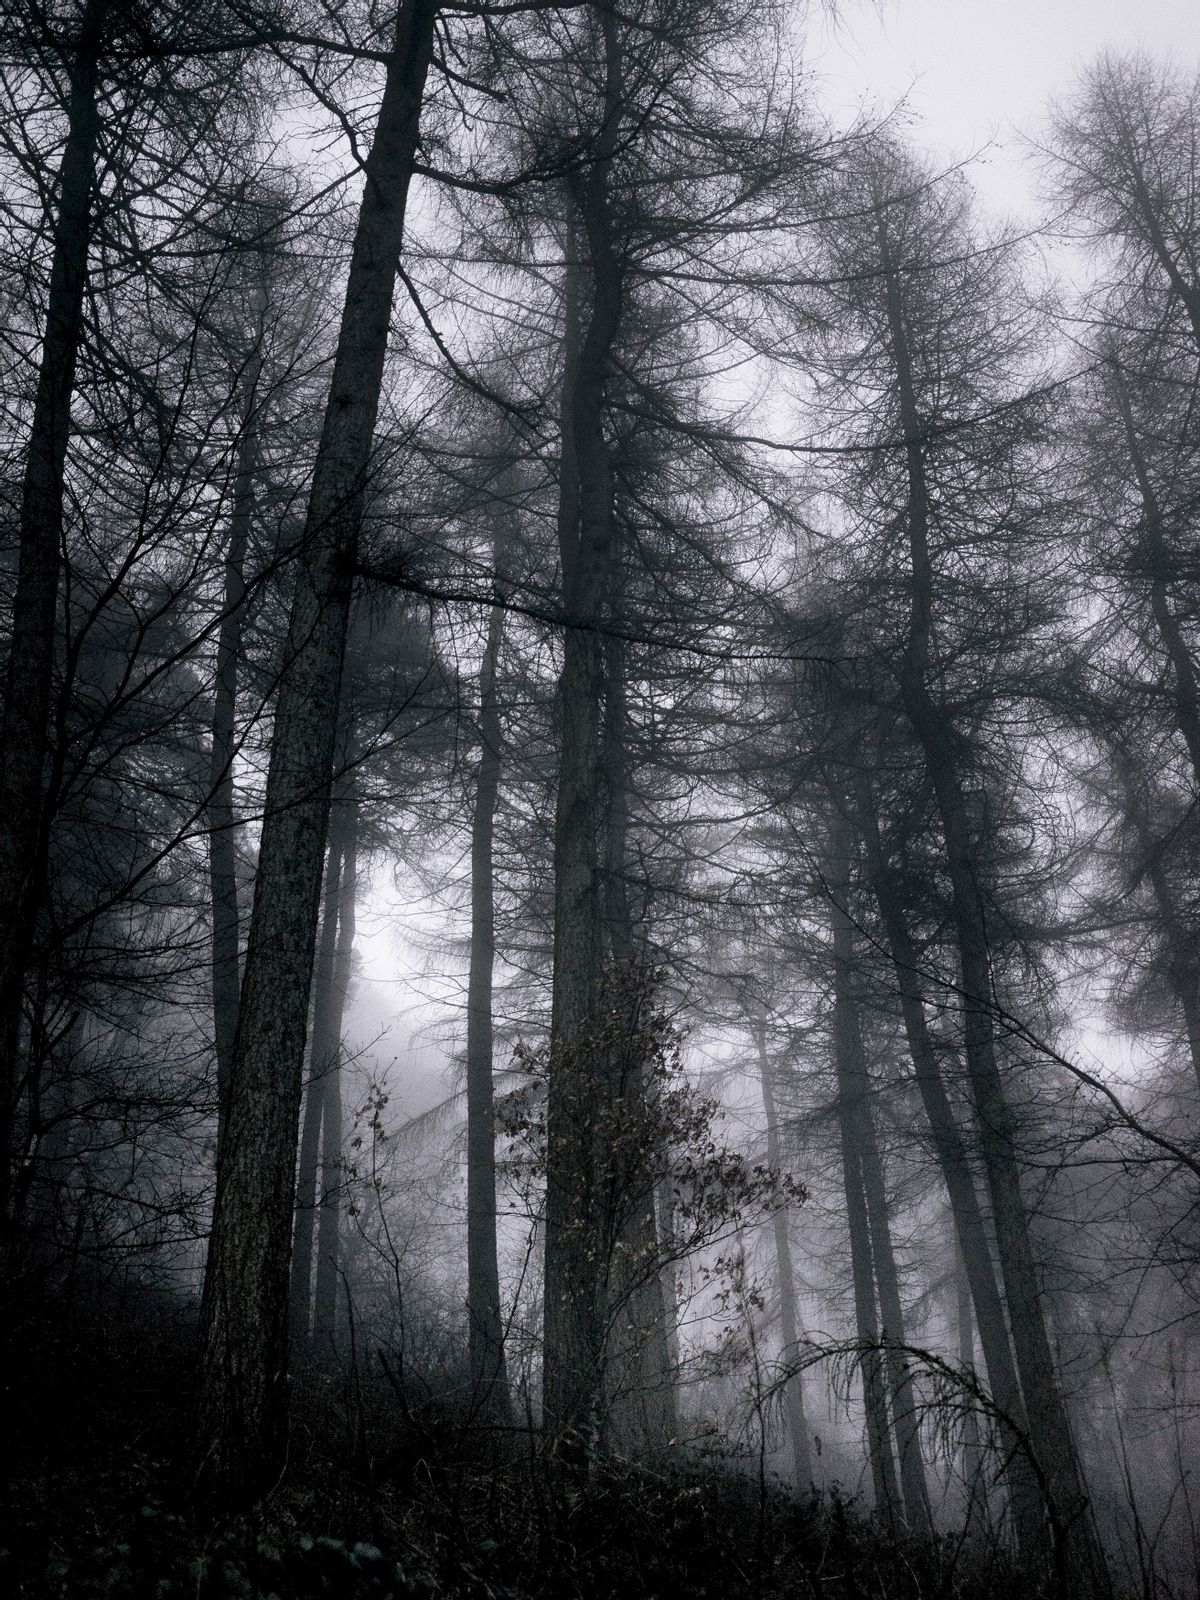 Download mobile wallpaper: Branches, Gloomy, Grey, Fog, Trees, Forest